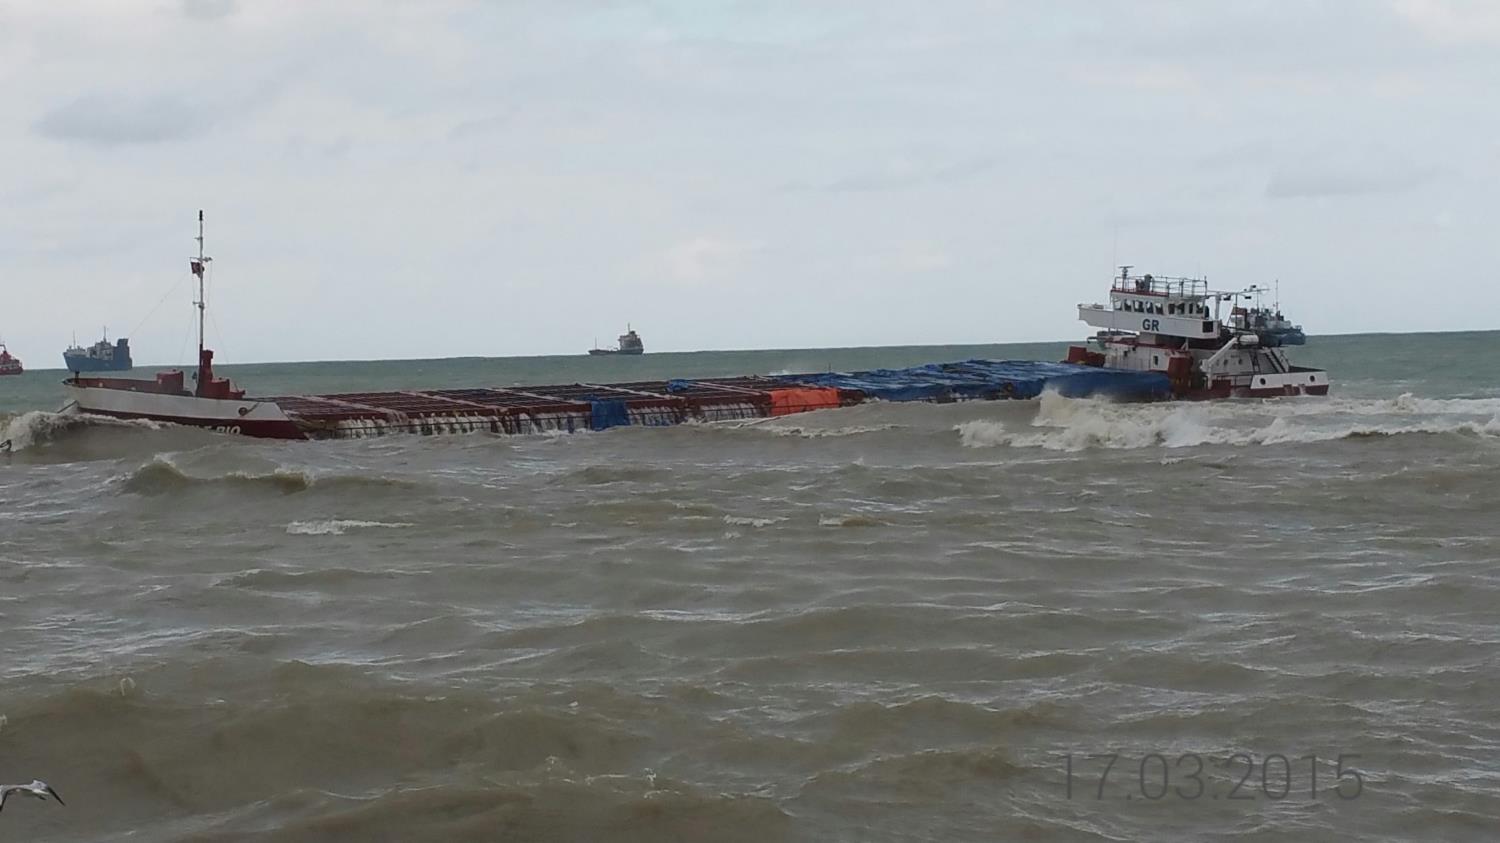 REMOVAL OF THE WRECKAGE OF THE SHIP M/V GULF RIO